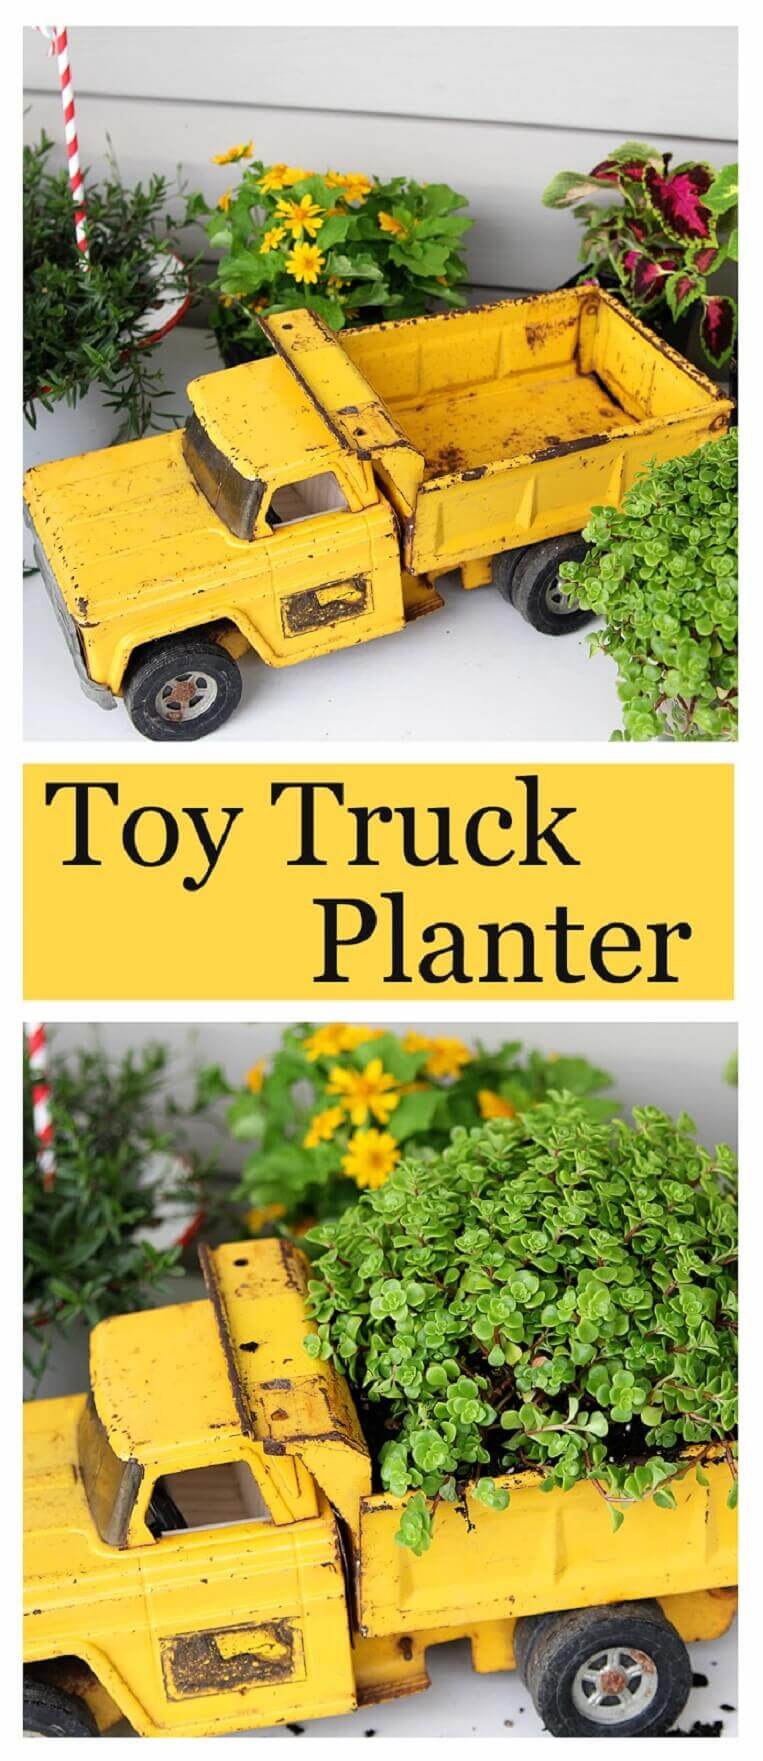 Repurposed Garden Container Ideas with a Toy Truck